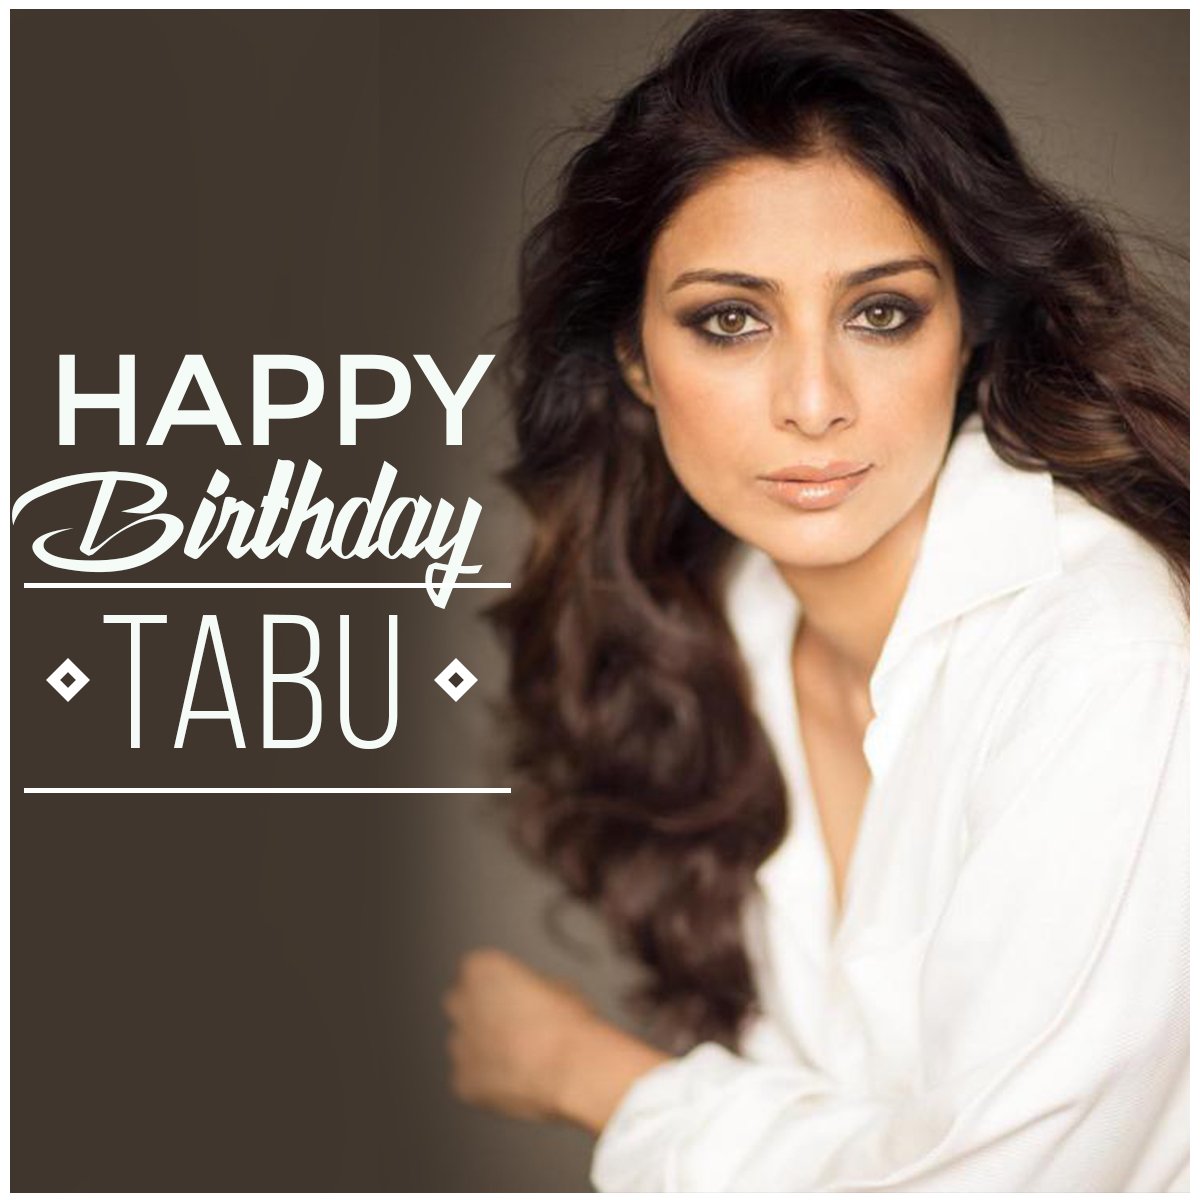 Happy Birthday Tabu: Did you know why the actress never spoke